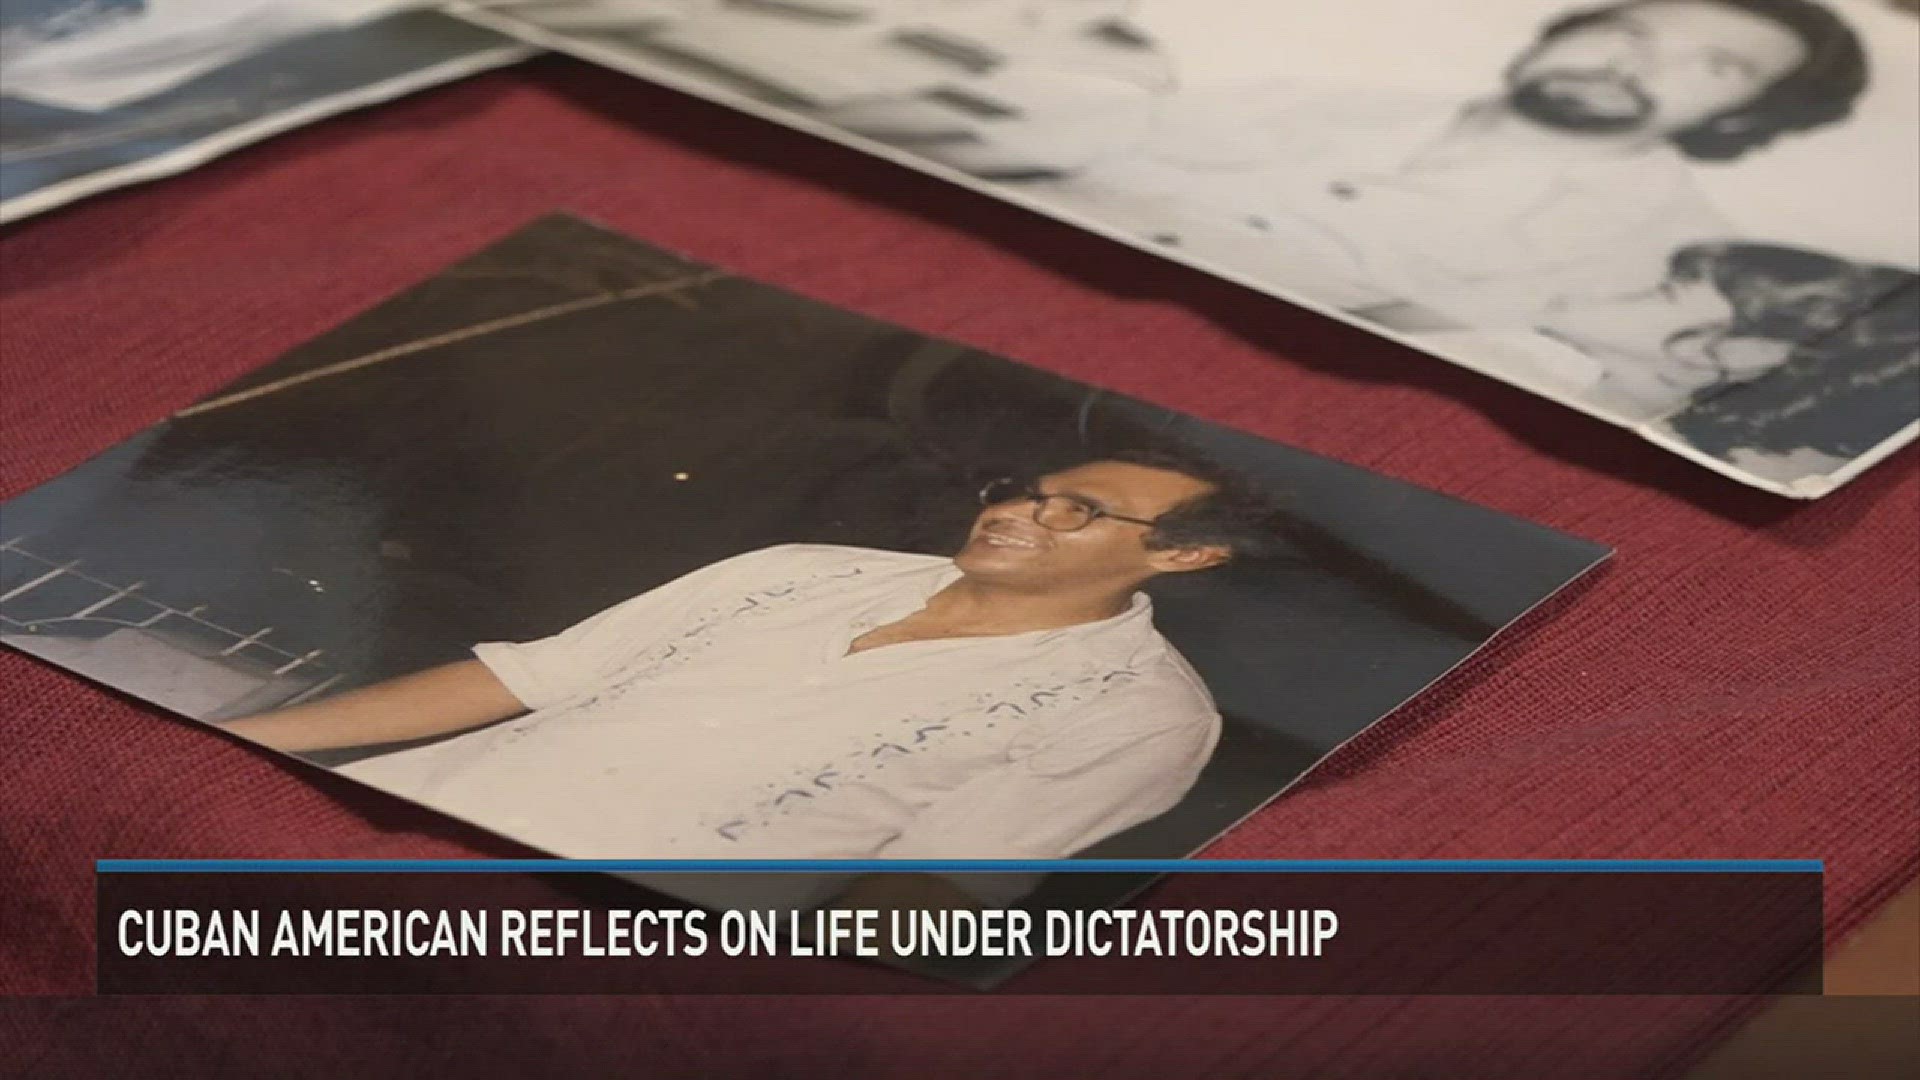 Dr. Samuell spent five years in a Cuban prison for speaking out against the Cuban government.